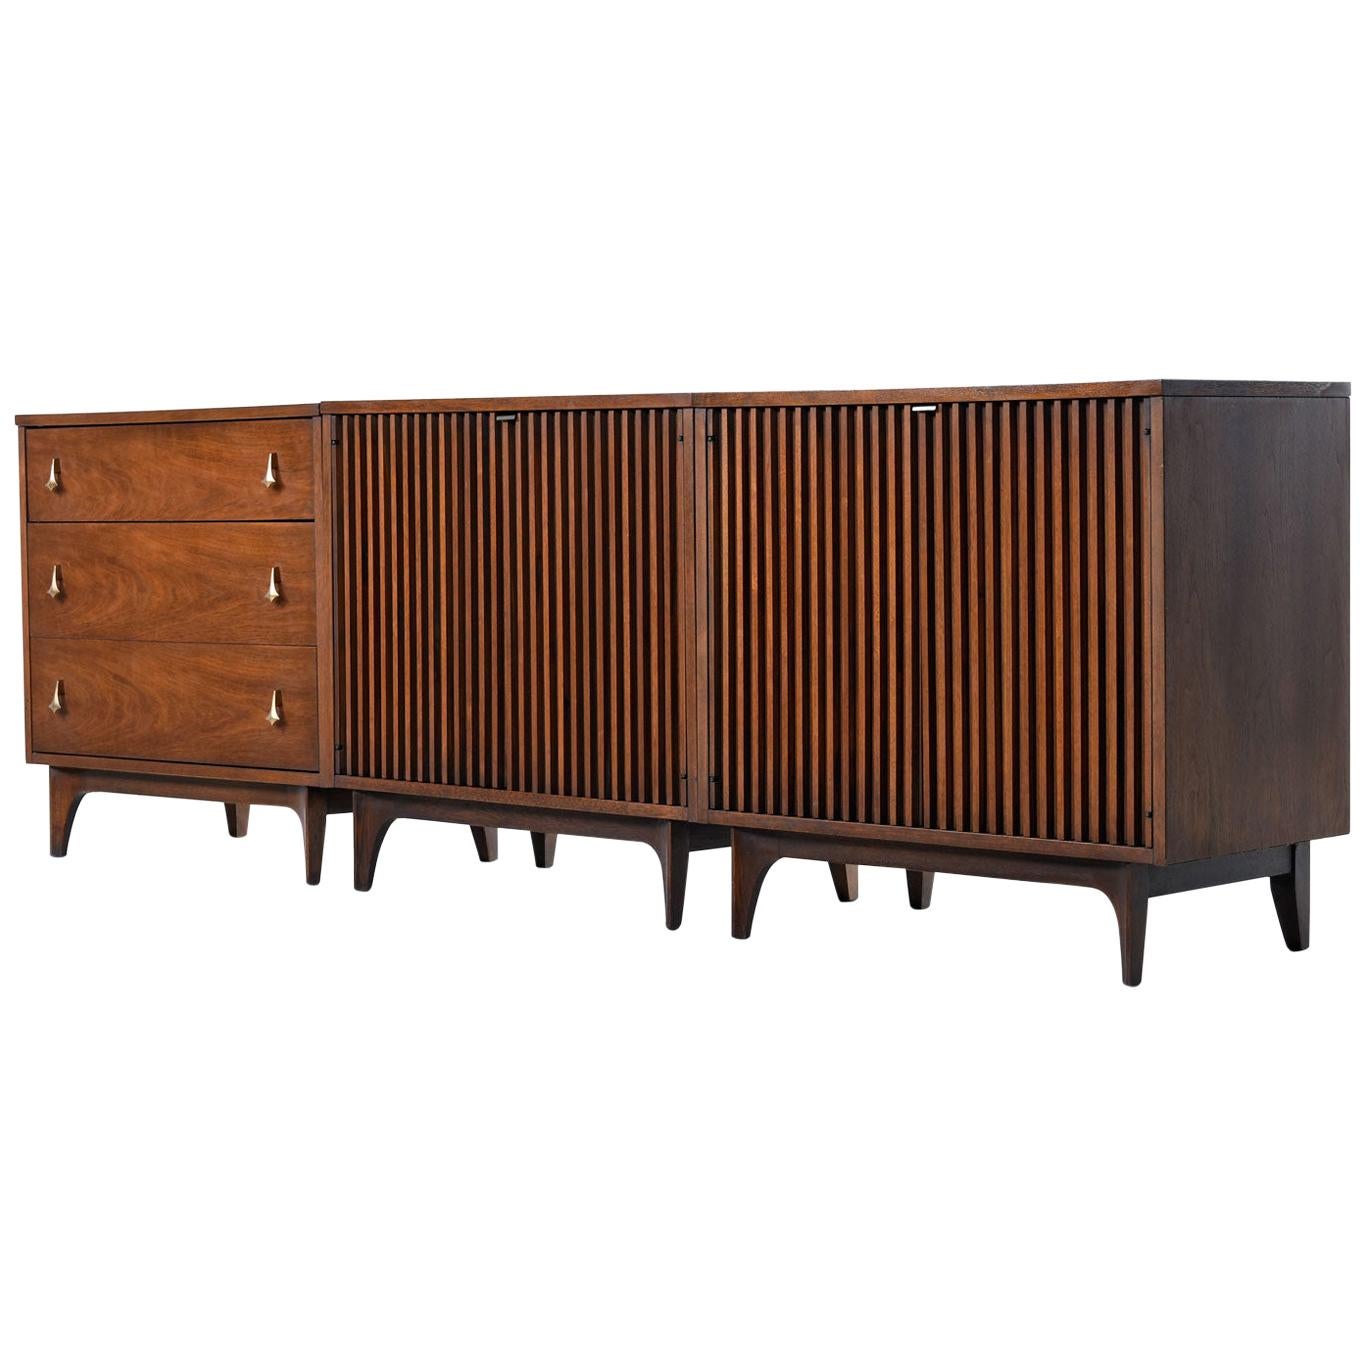 Stand all three cabinets side by side in any arrangement to create one massive credenza or break them up as individuals or pairs. The modular possibilities allow them to work seamlessly in nearly any room. This 3-piece set was delicately restored to